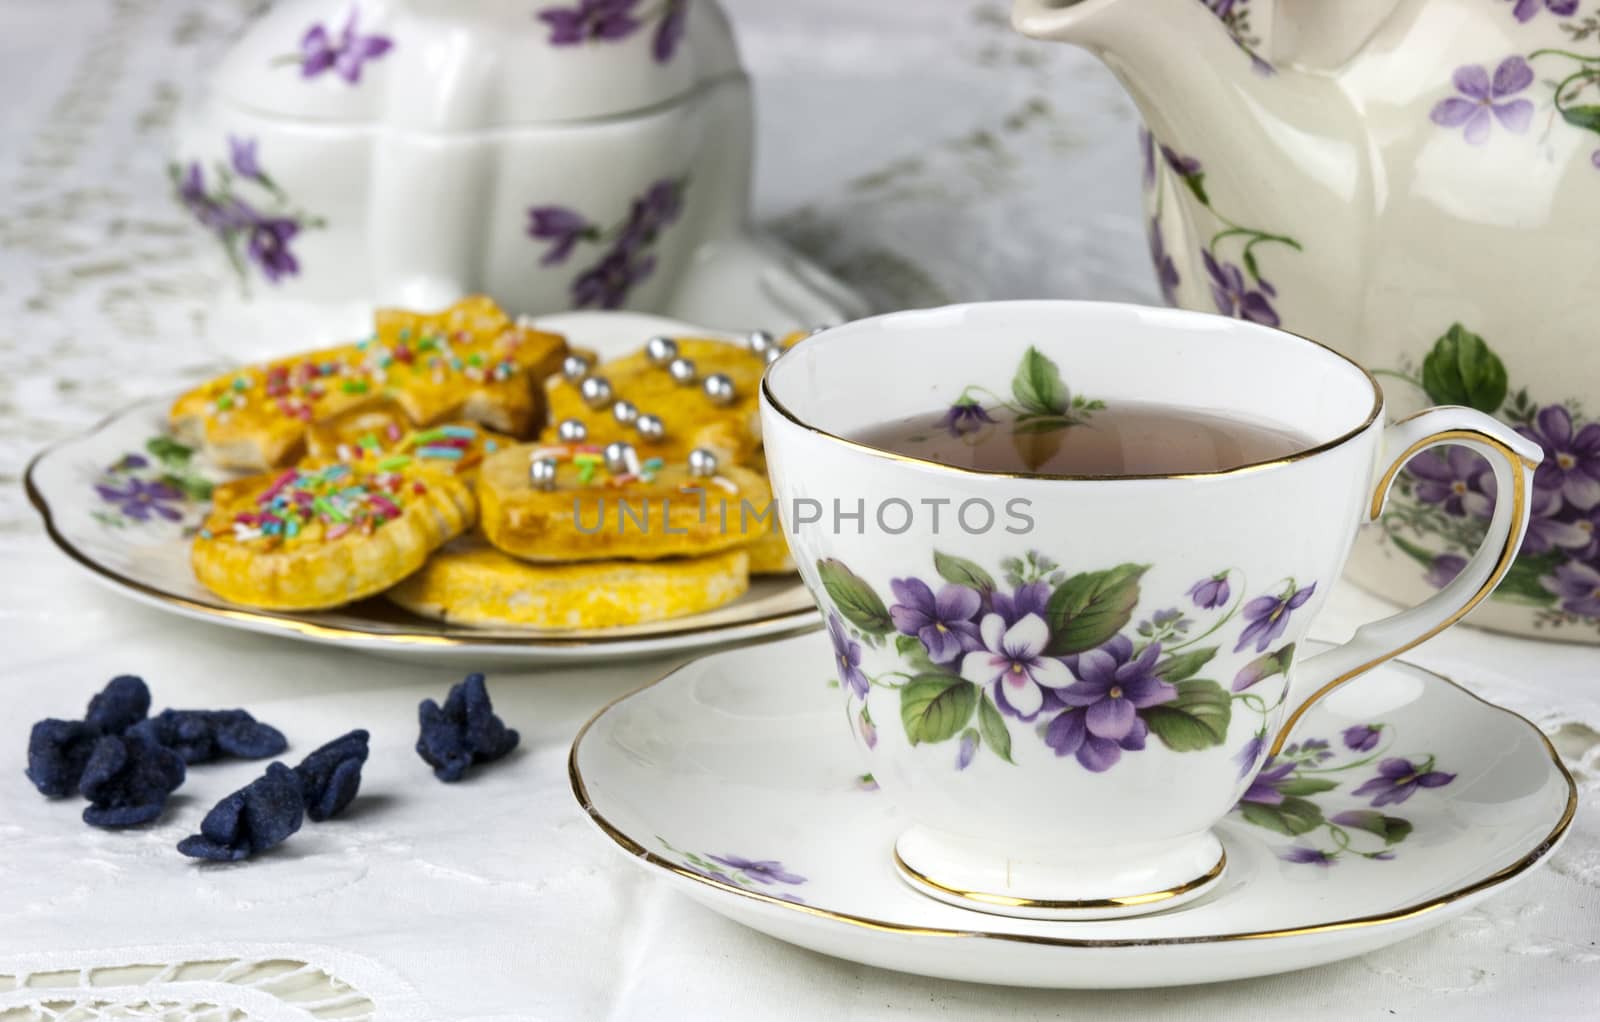 English afternoon tea with cookies and candied violets